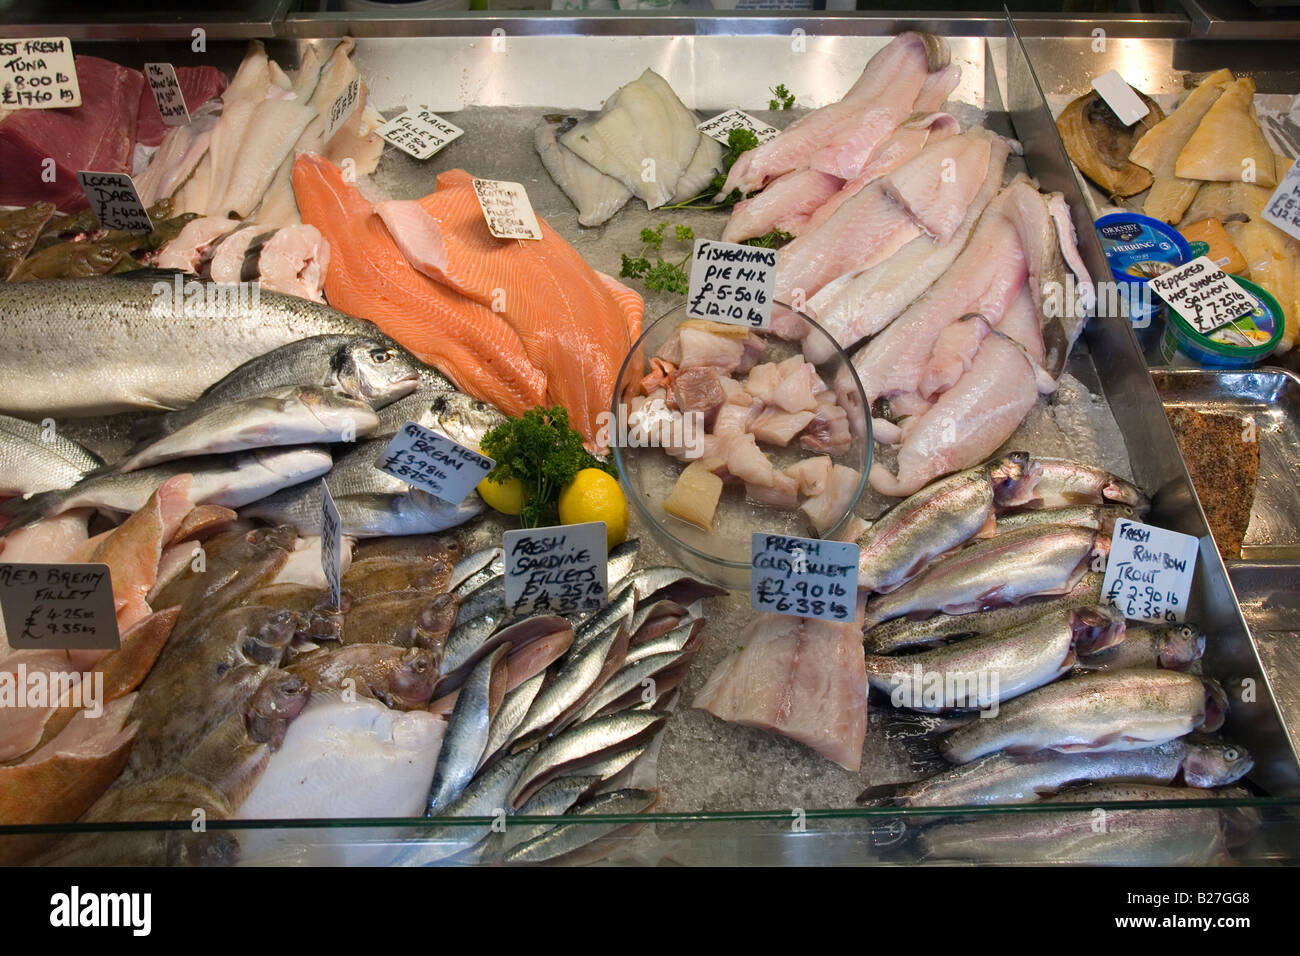 A display of freshly caught fish at a fishmongers in Hastings Old Town Sussex UK Stock Photo